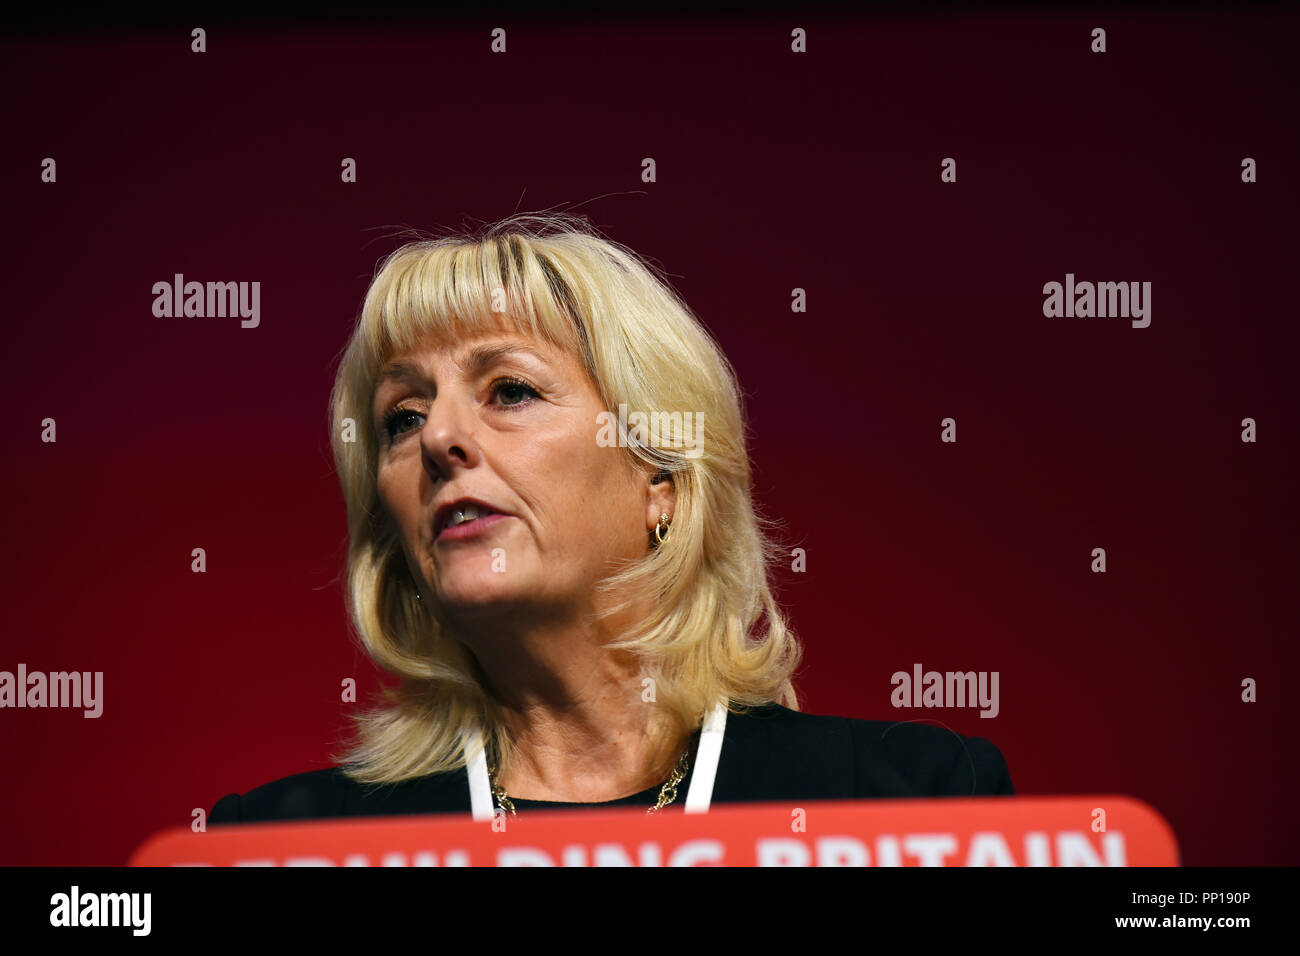 Liverpool, UK. 23rd Sep, 2018. Jennie Formby. Newly elected General Secretary of the Labour Party addressing the Labour Party conference in Liverpool for the first time as General Secretary.of the Labour Party Credit: Della Batchelor/Alamy/Live News Stock Photo